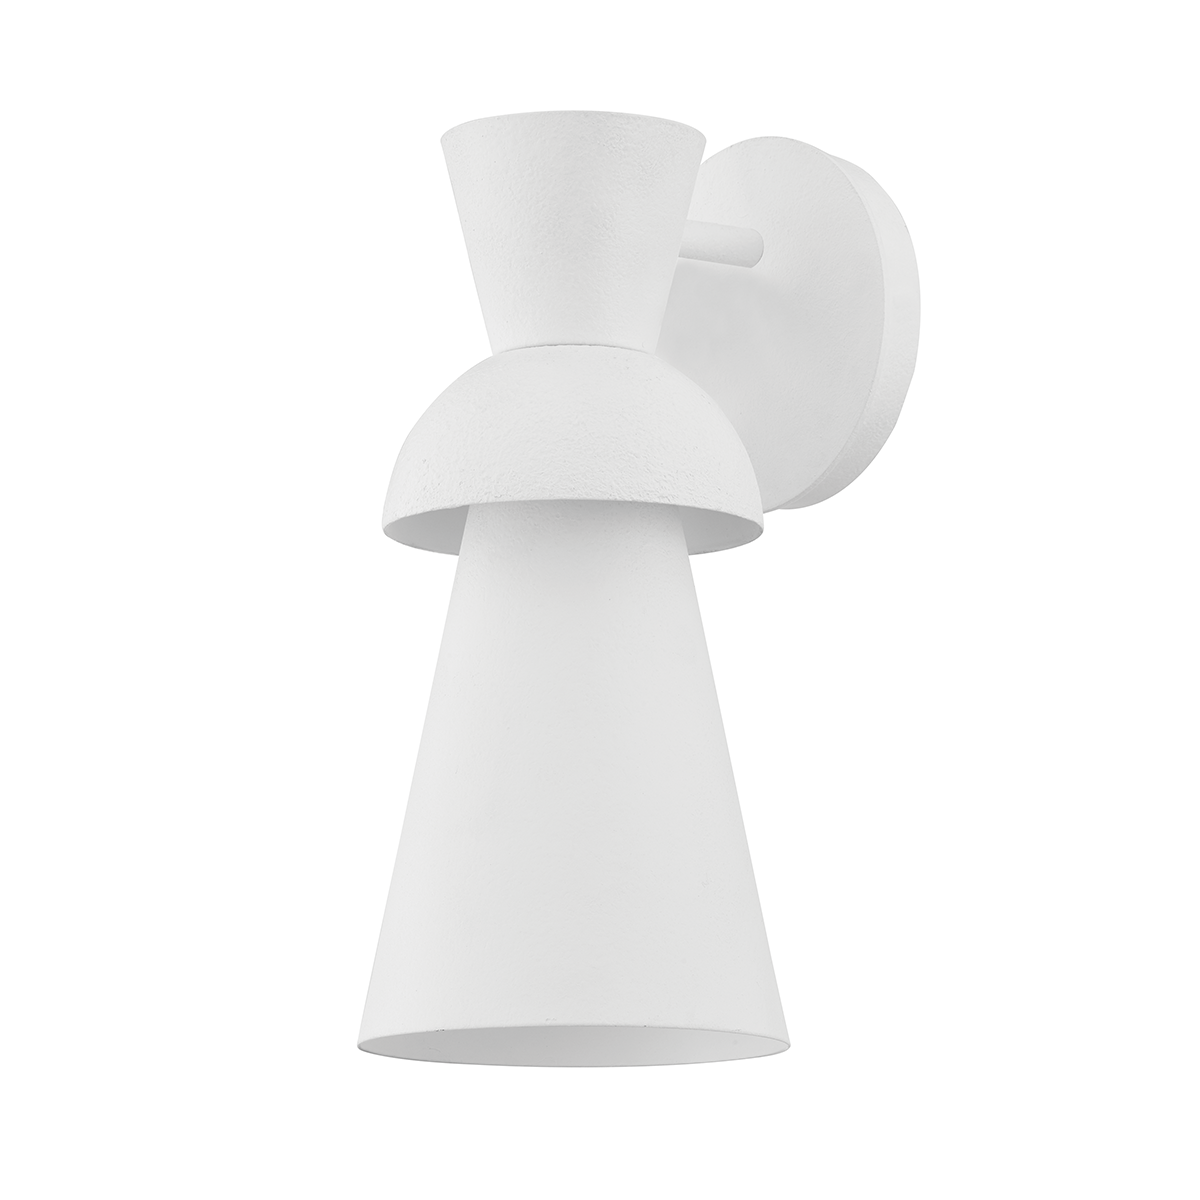 Troy Lighting Florence Wall Sconce Wall Sconce Troy Lighting GESSO WHITE 5.5x5.5x11.75 